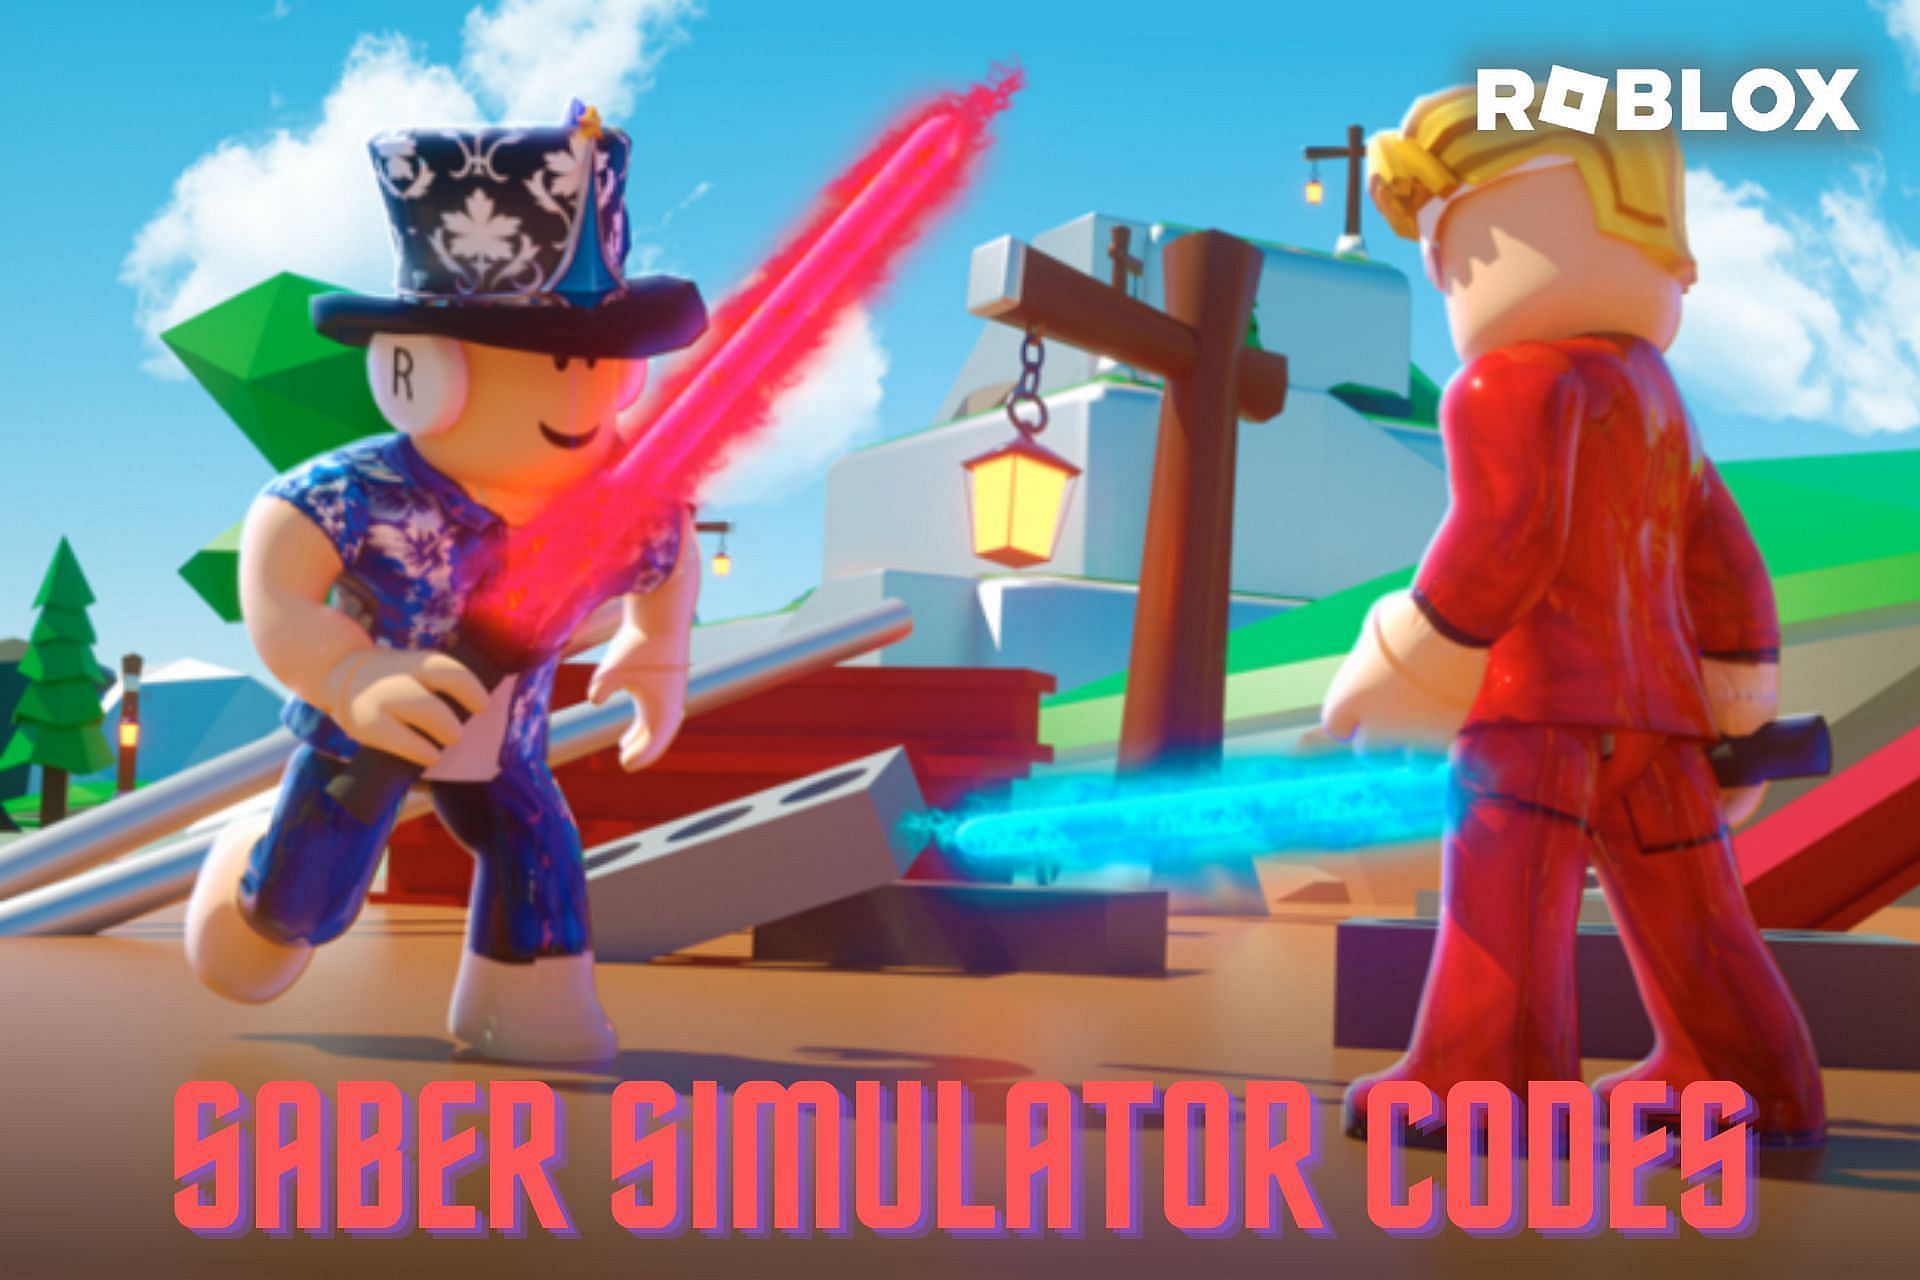 Roblox Saber Simulator Codes December 2022 Free Crowns Coins And More